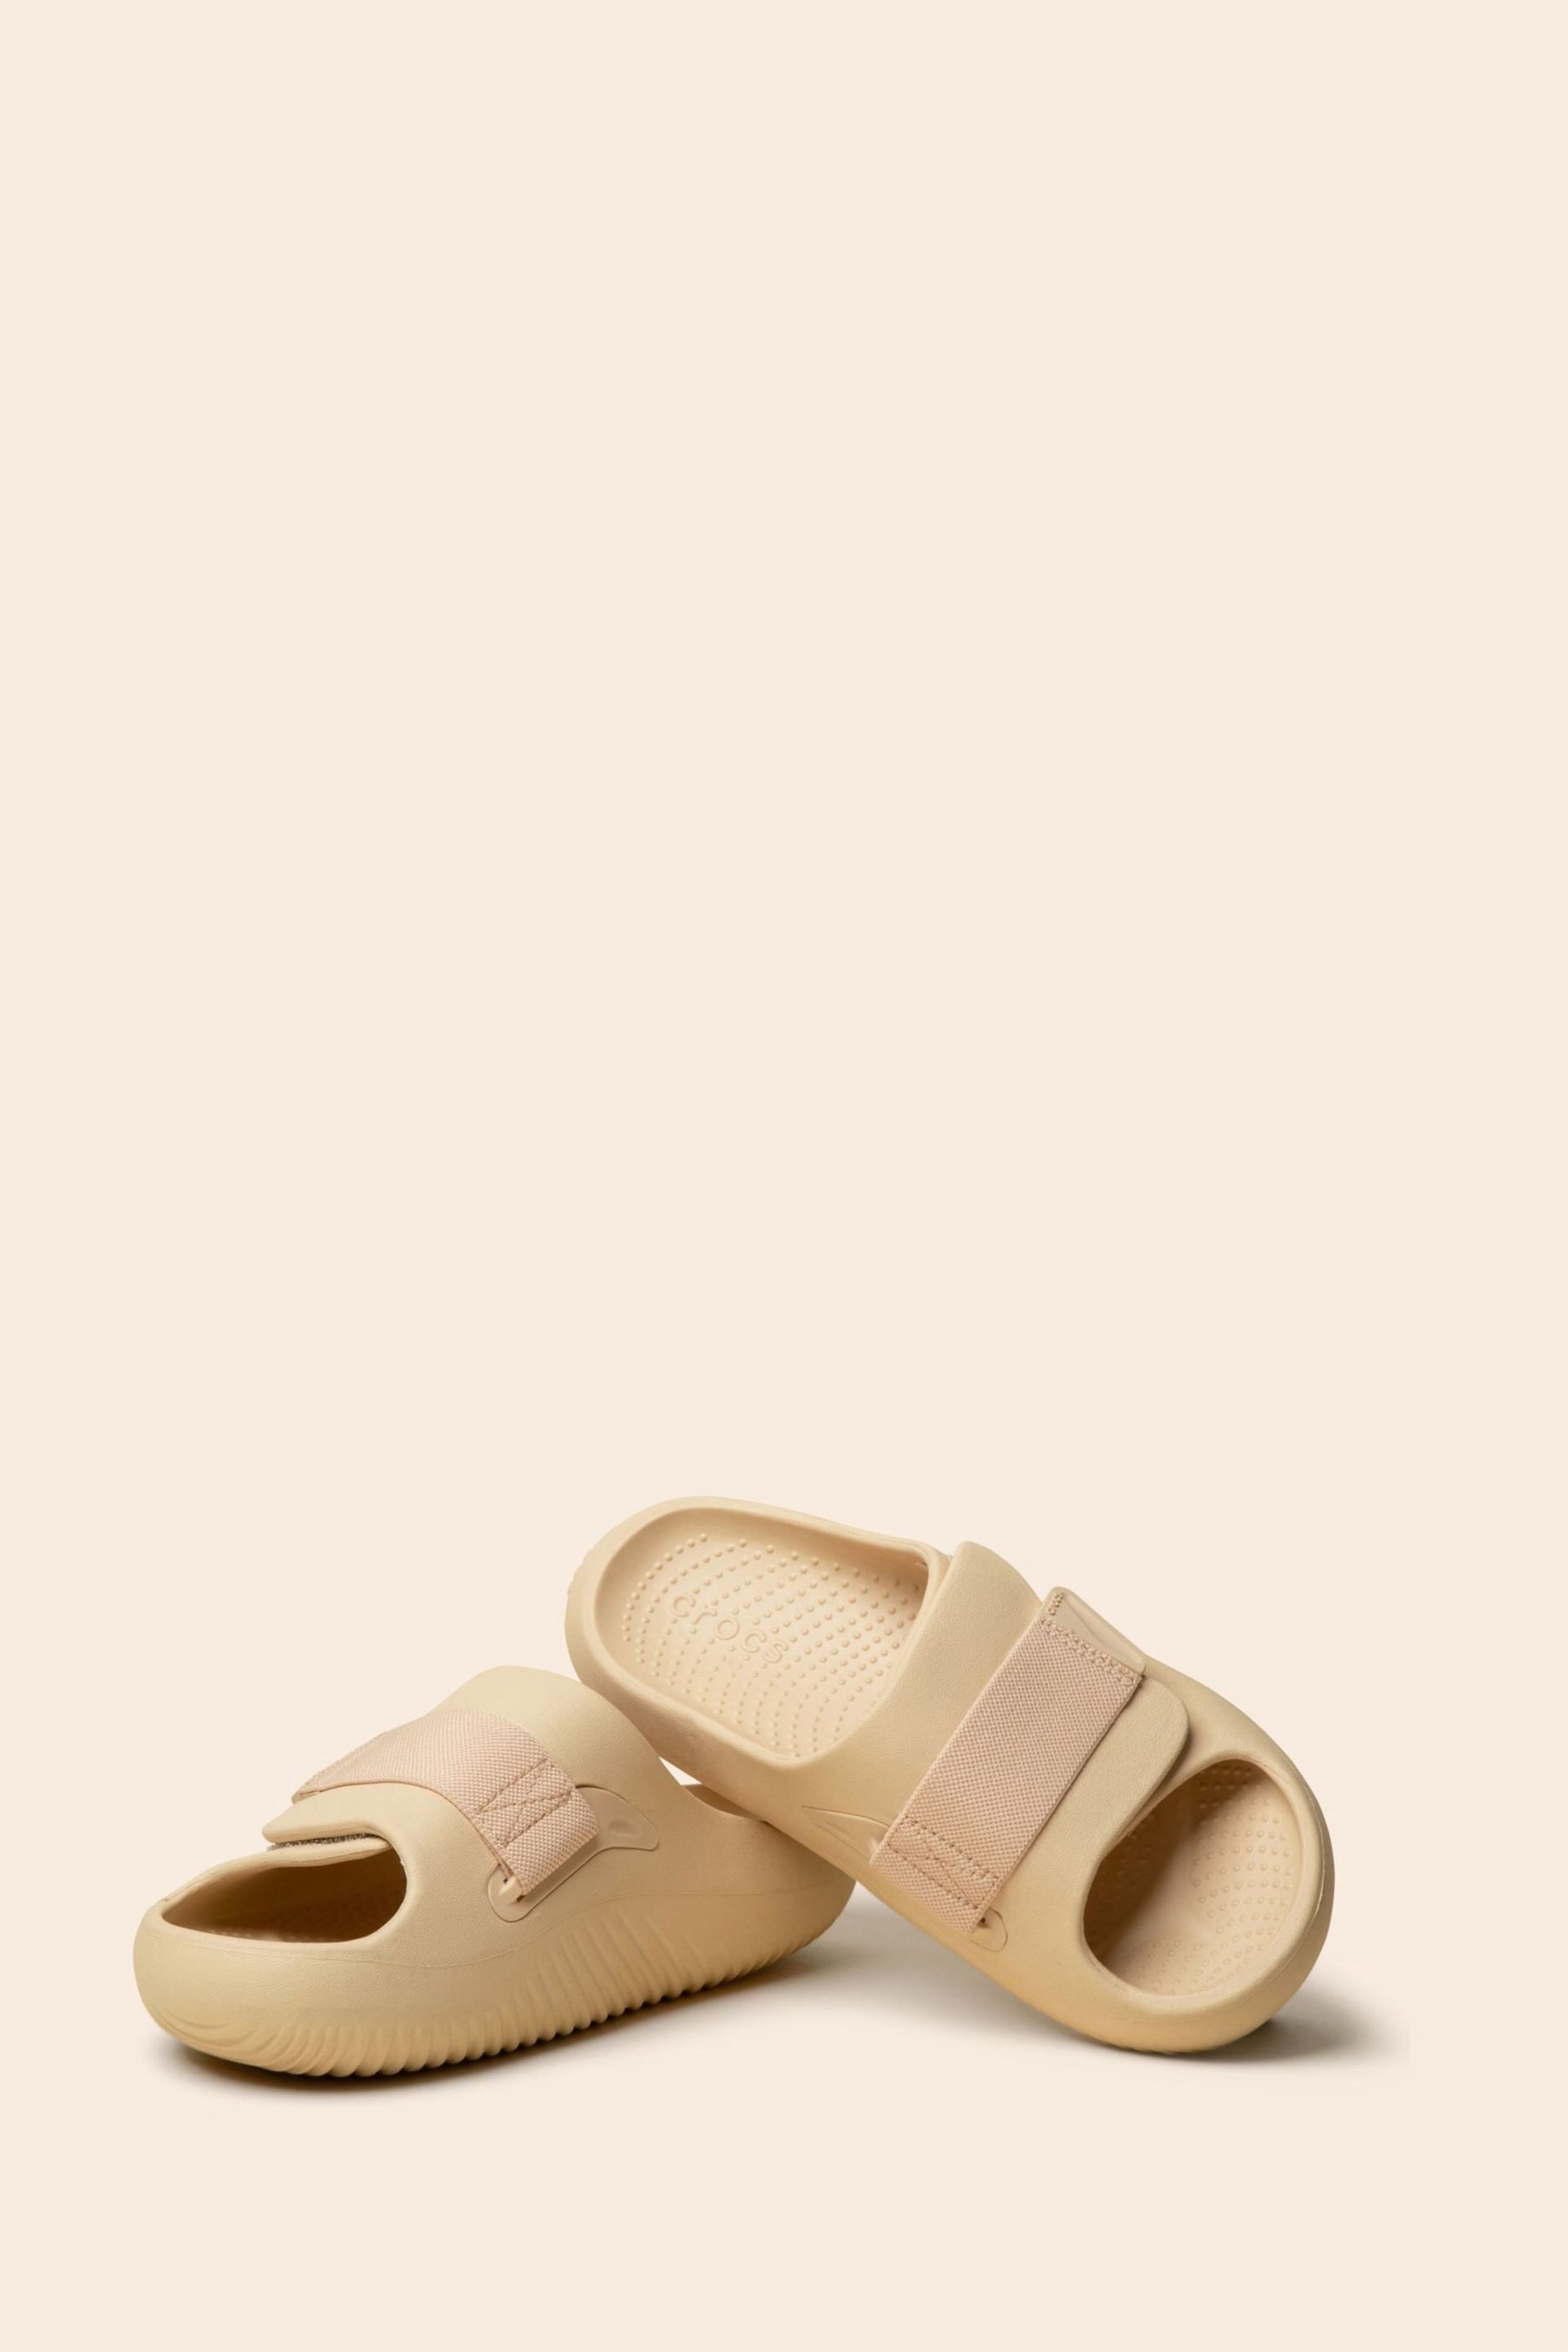 Crocs Mellow Luxe Recovery Slide - Image 5 of 5